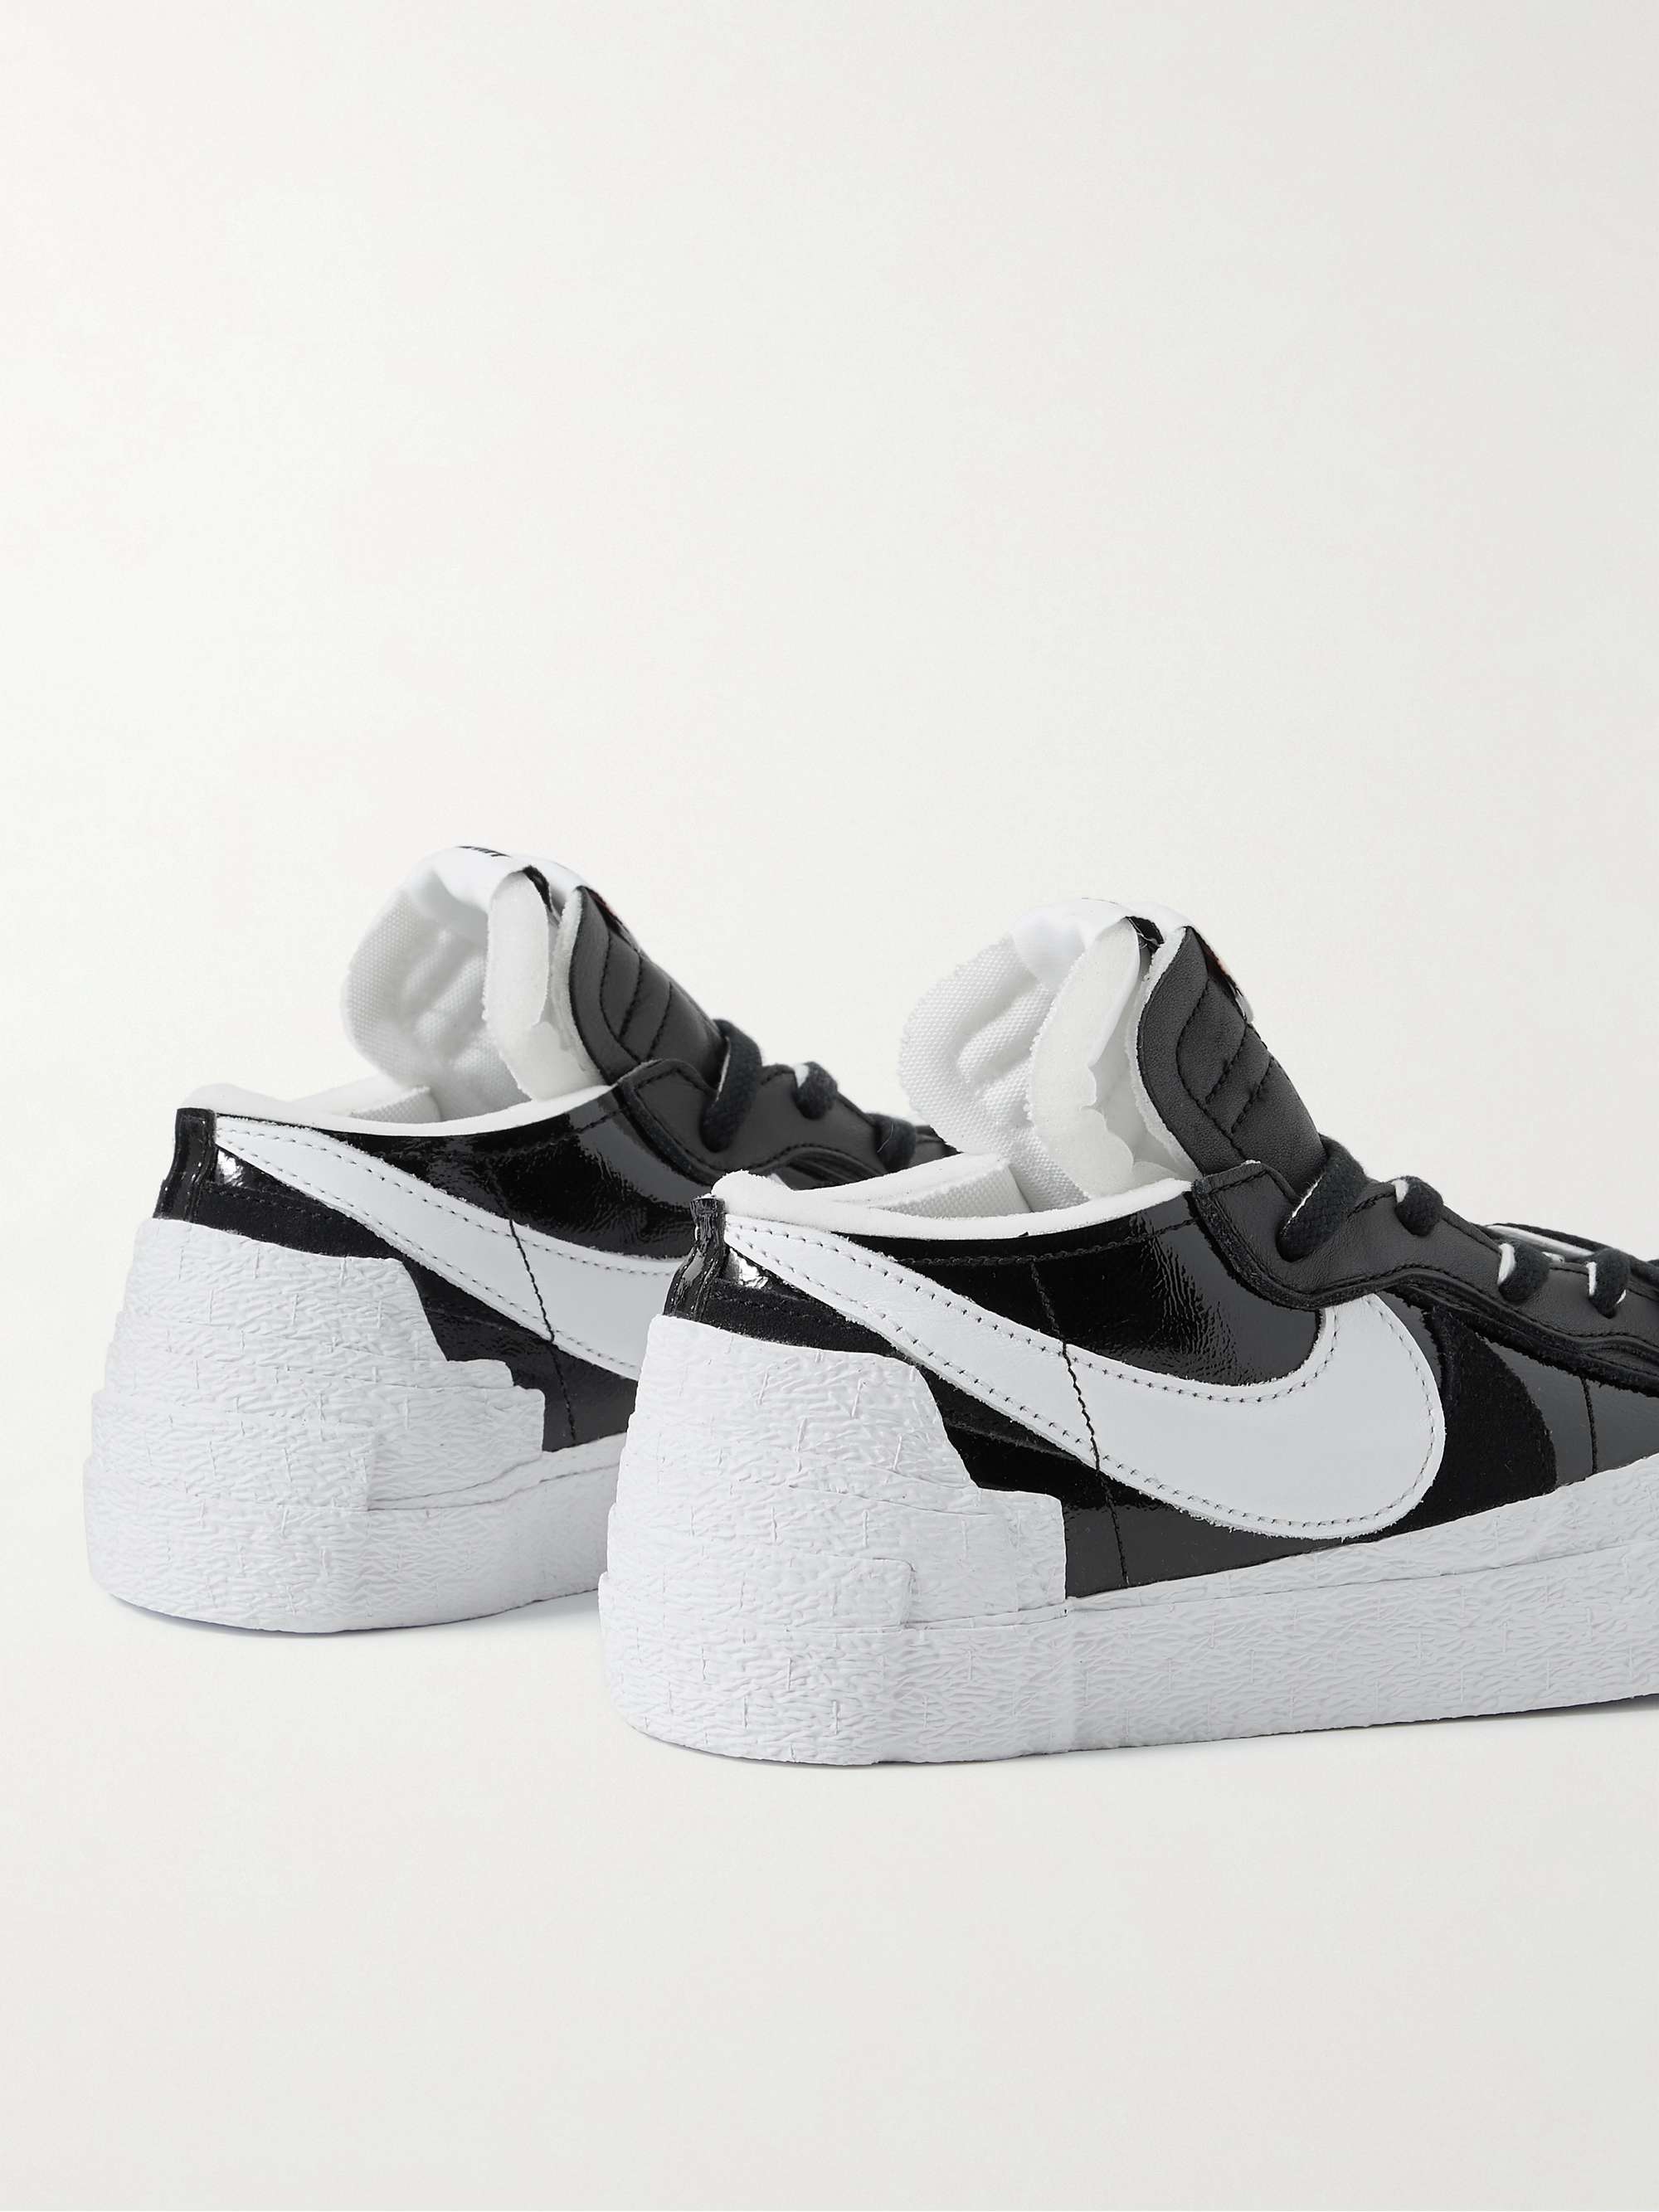 NIKE + Sacai Blazer Low Suede-Trimmed Leather Sneakers for Men | MR PORTER